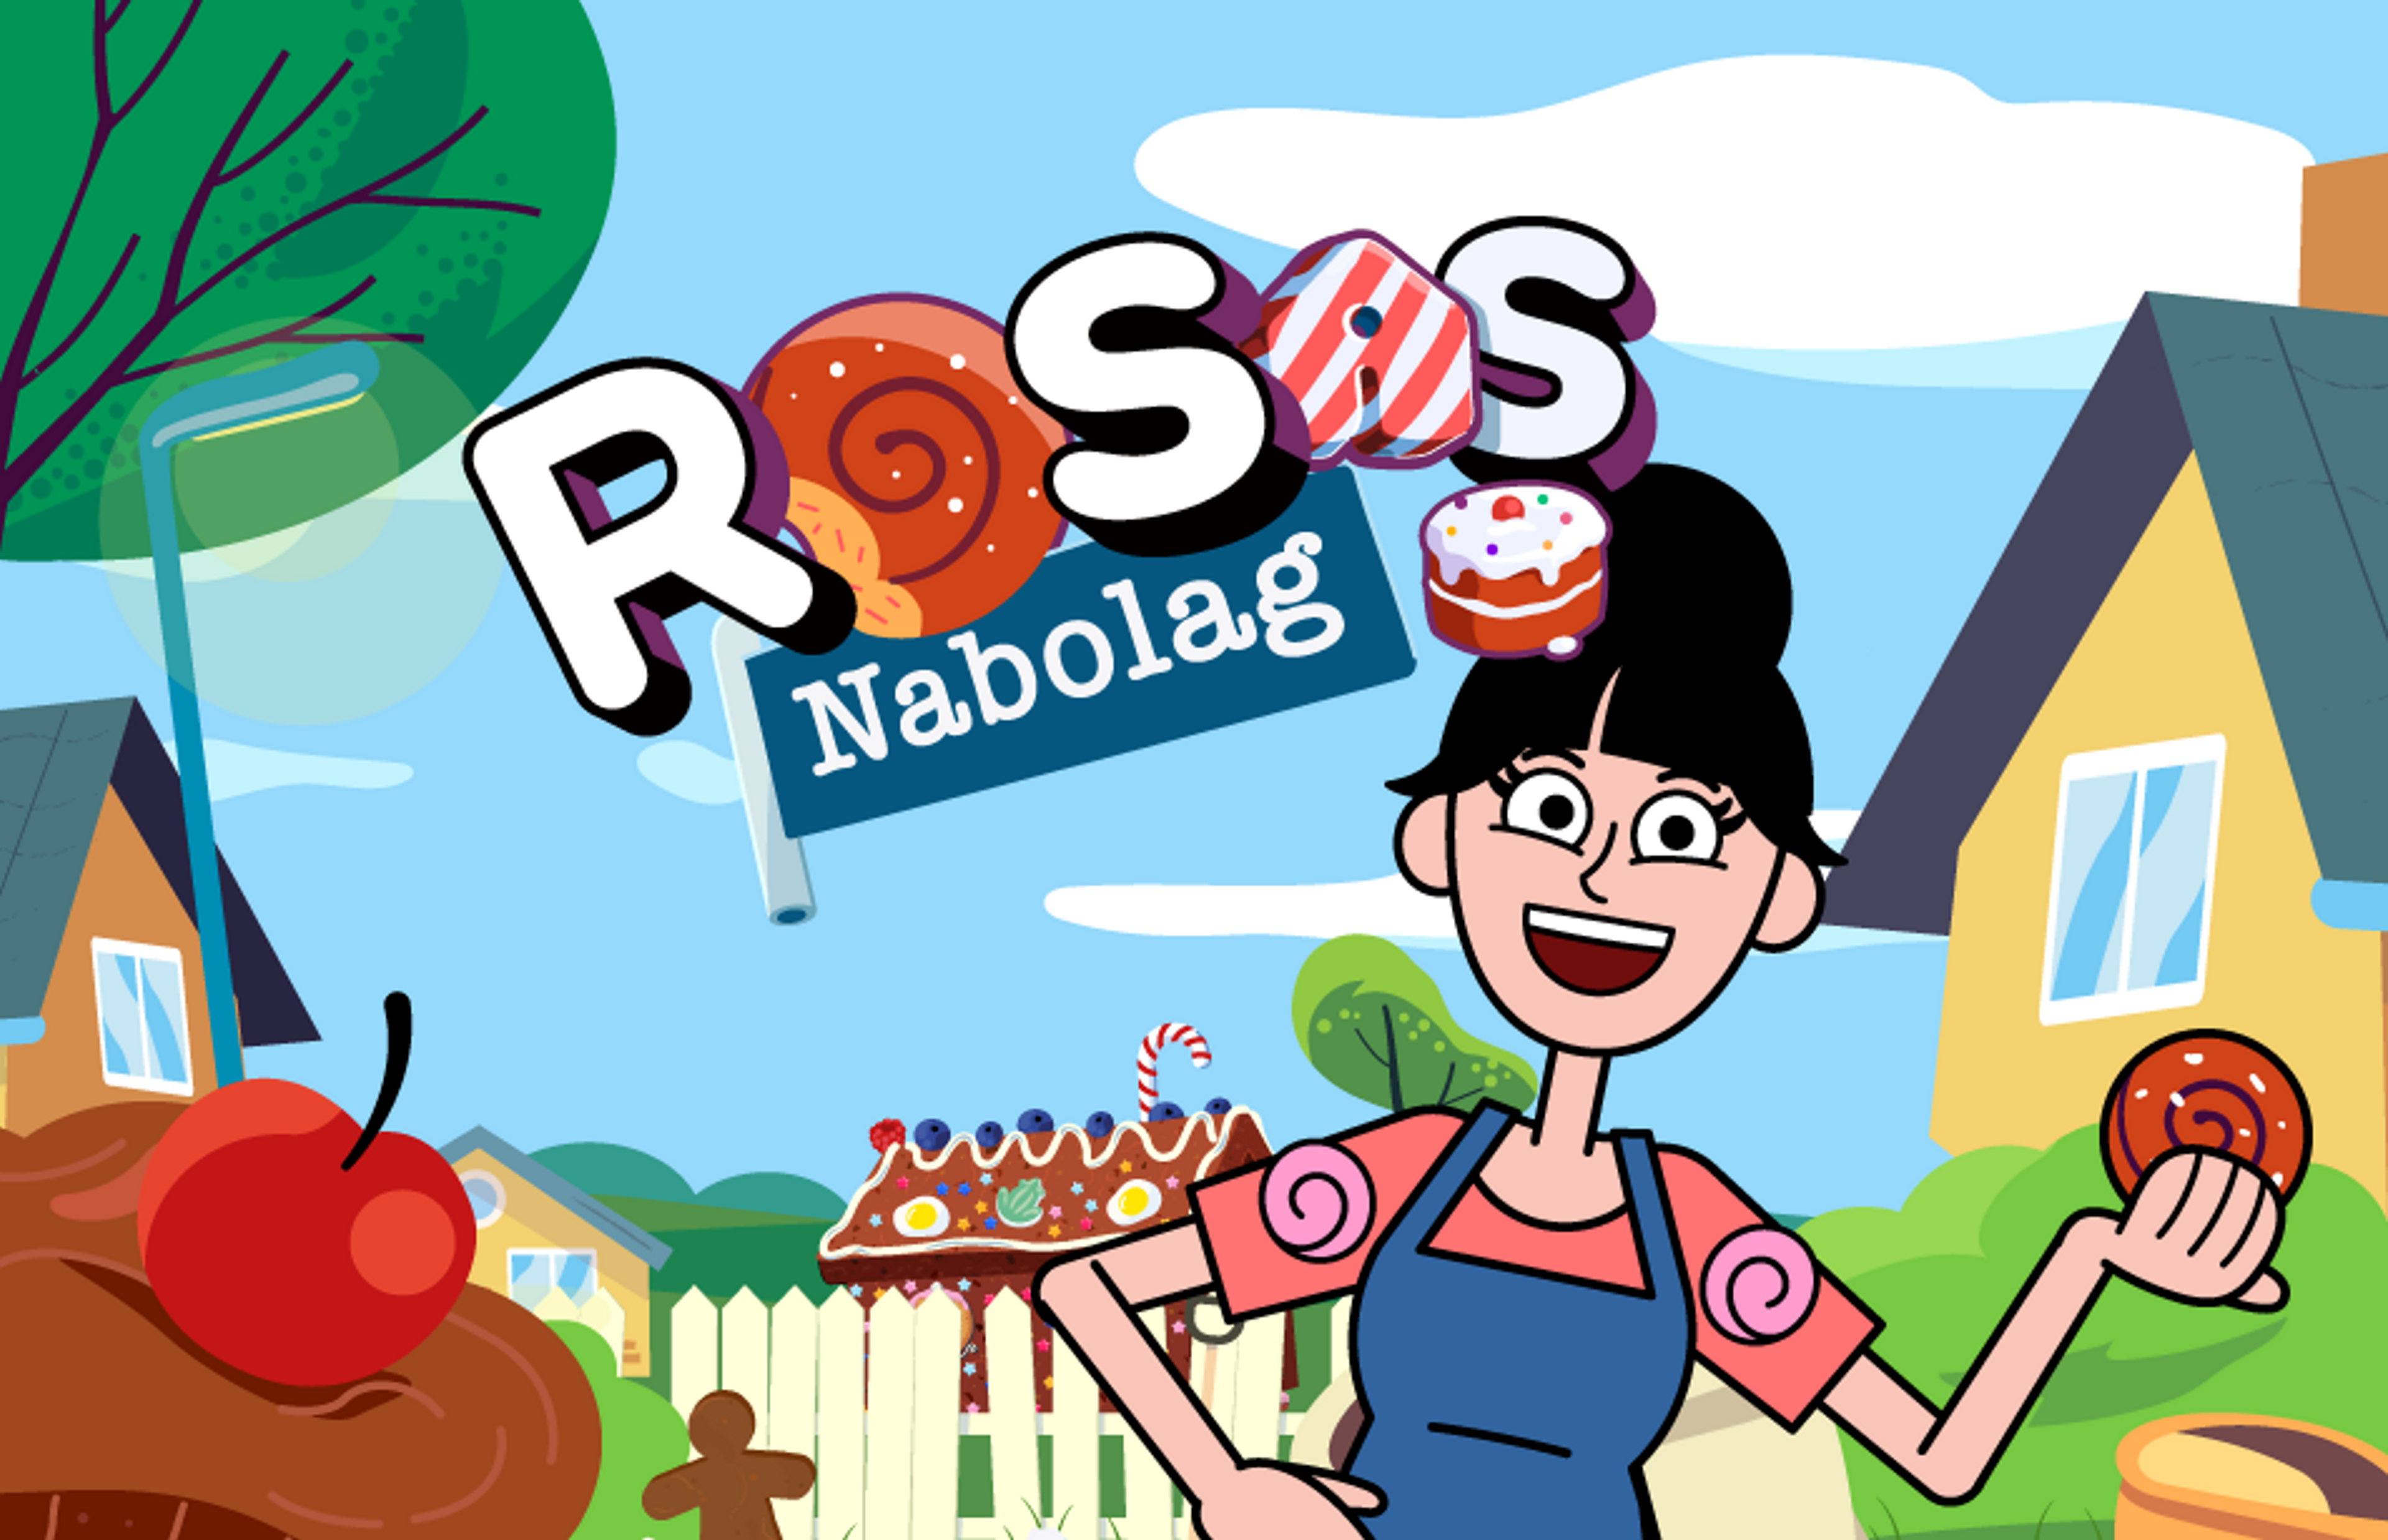 Rosa in front of a town